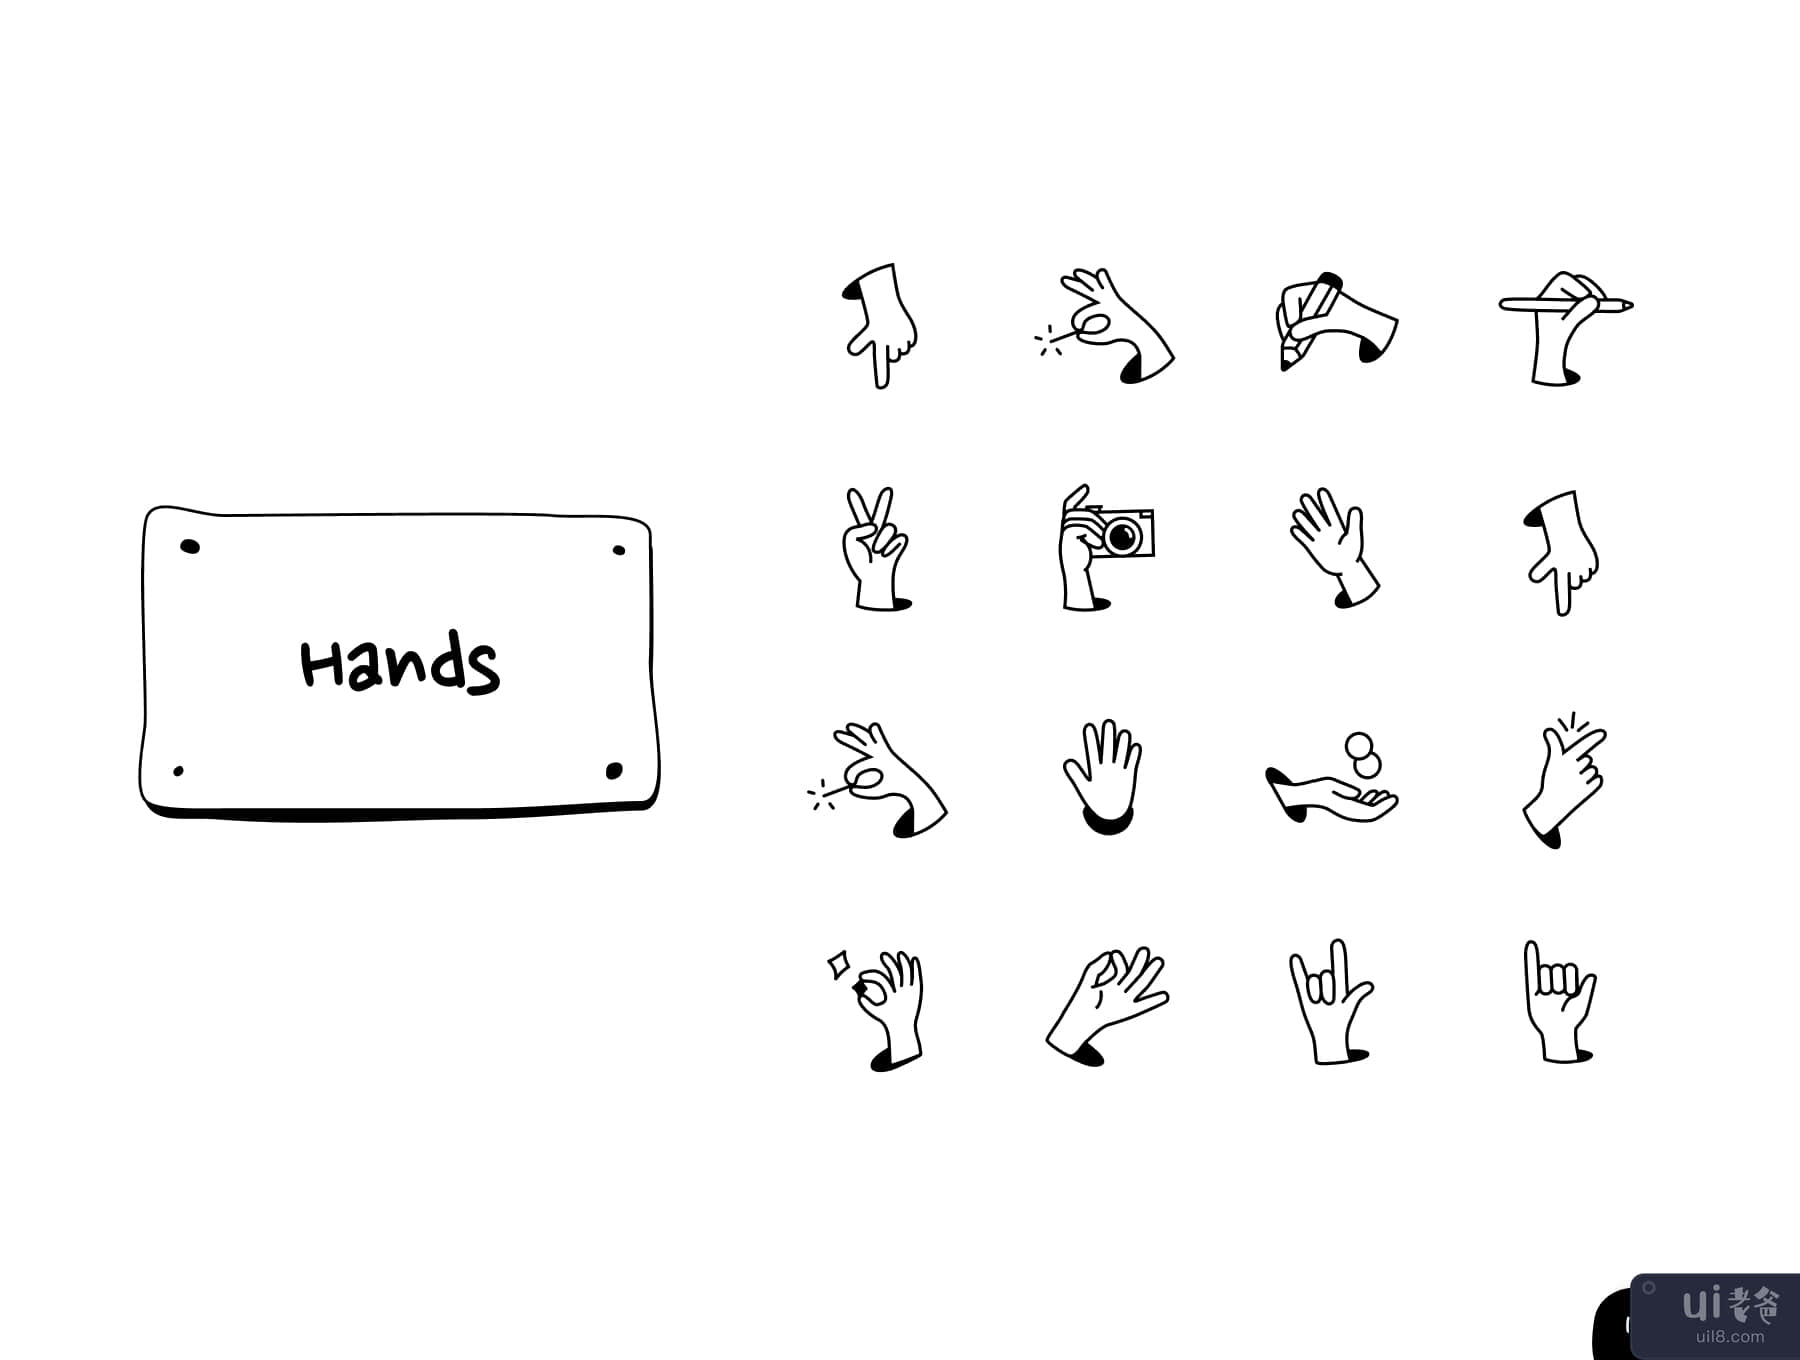 hands_inking_icon_set_by_asset_union (hands_inking_icon_set_by_asset_union)插图4